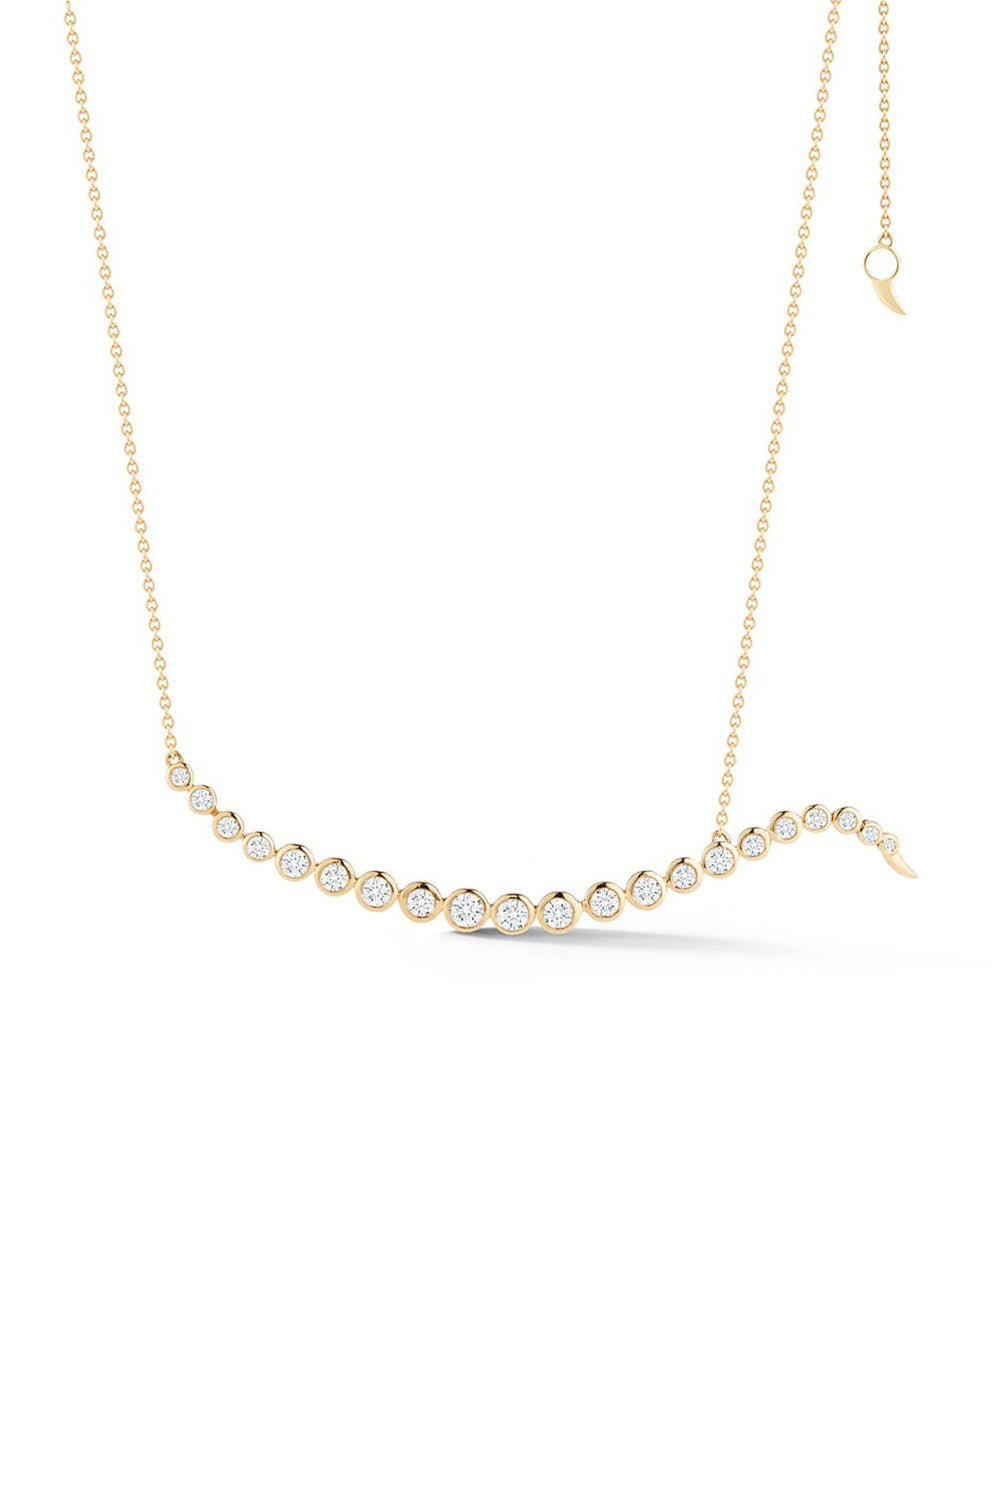 ONDYN-Luminescence Necklace-YELLOW GOLD